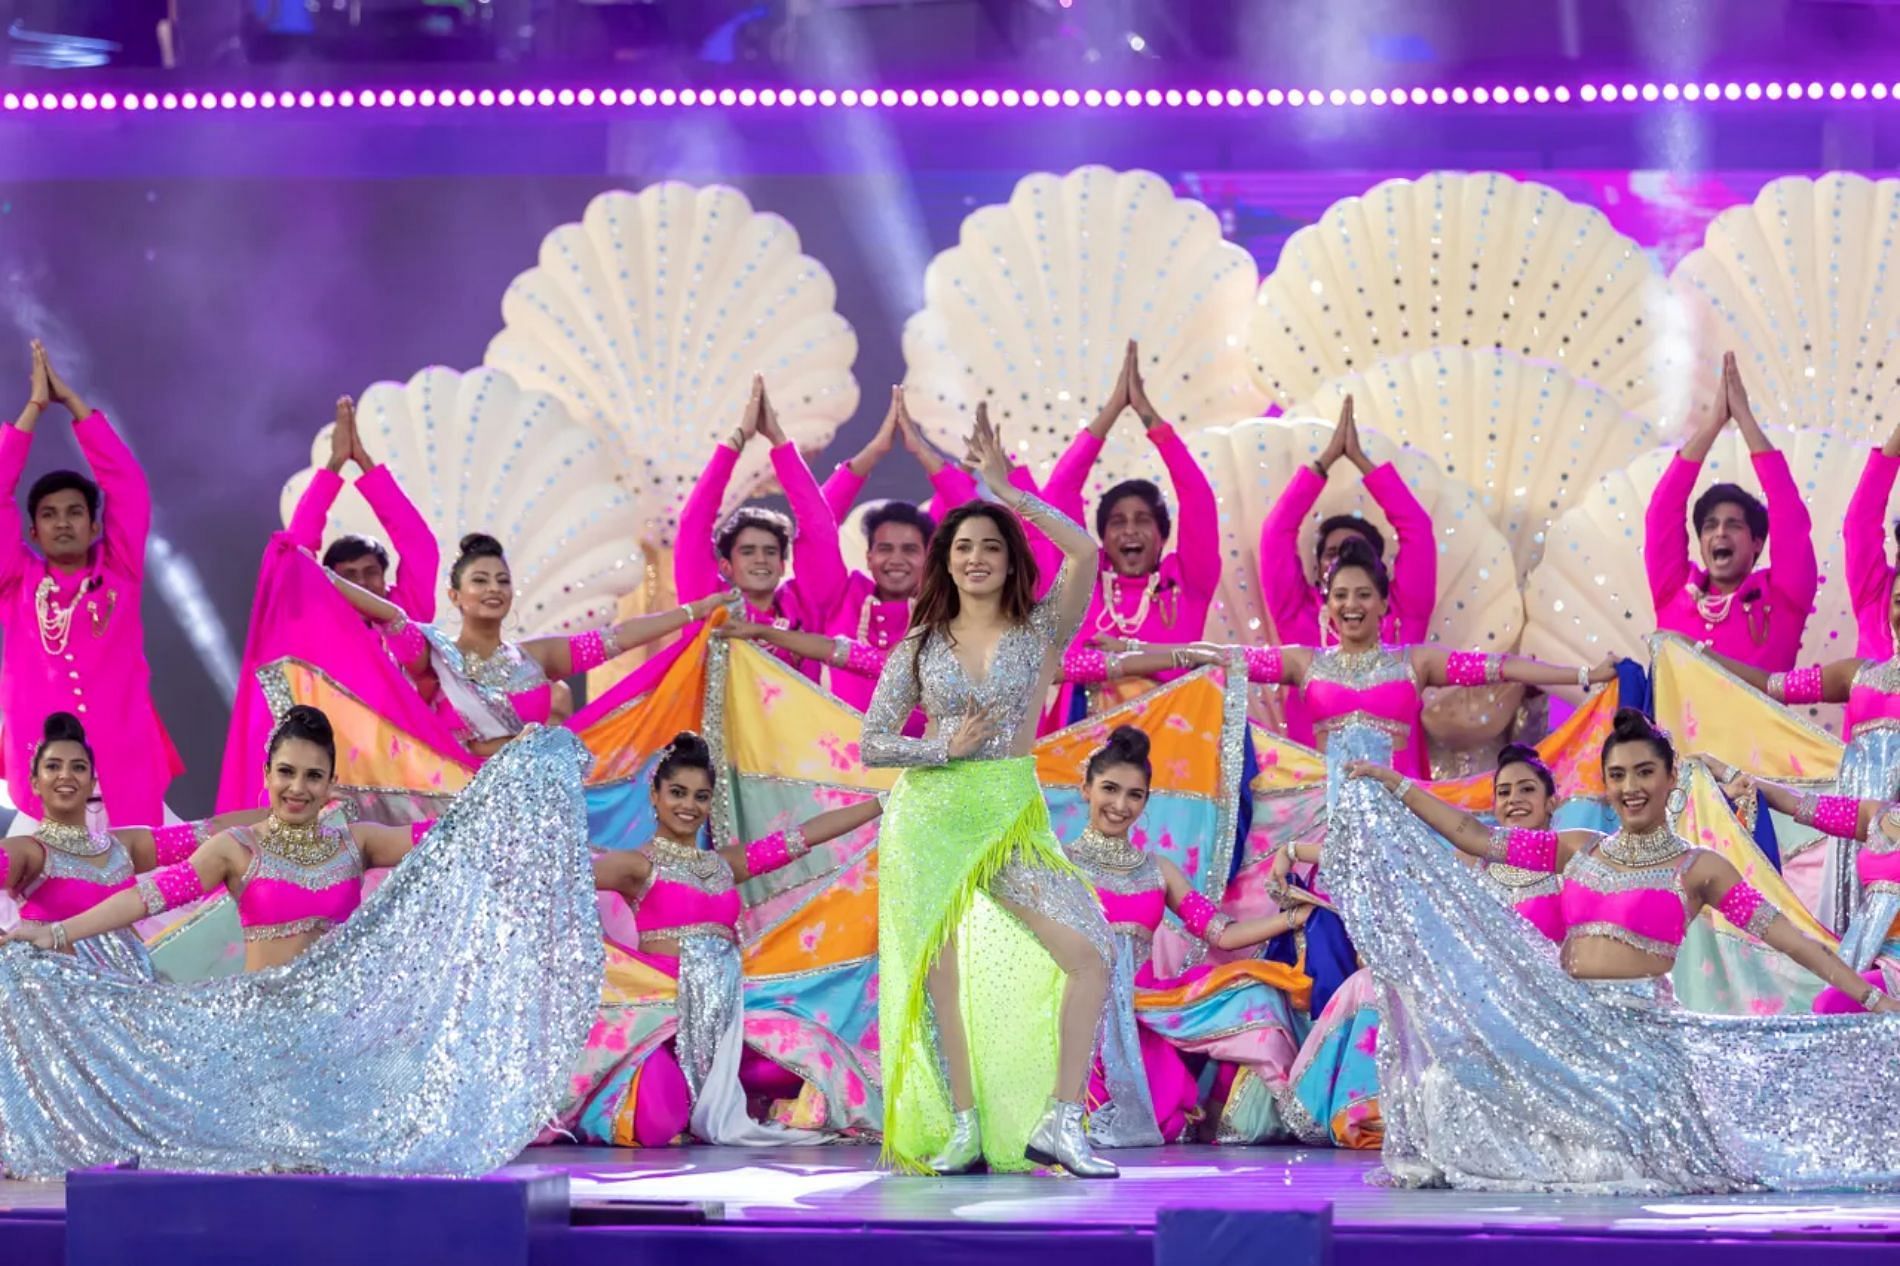 Ipl 2024 Opening Ceremony: IPL 2024 Opening Ceremony: List Of Performers,  When And Where To Watch For Free - All You Need To Know